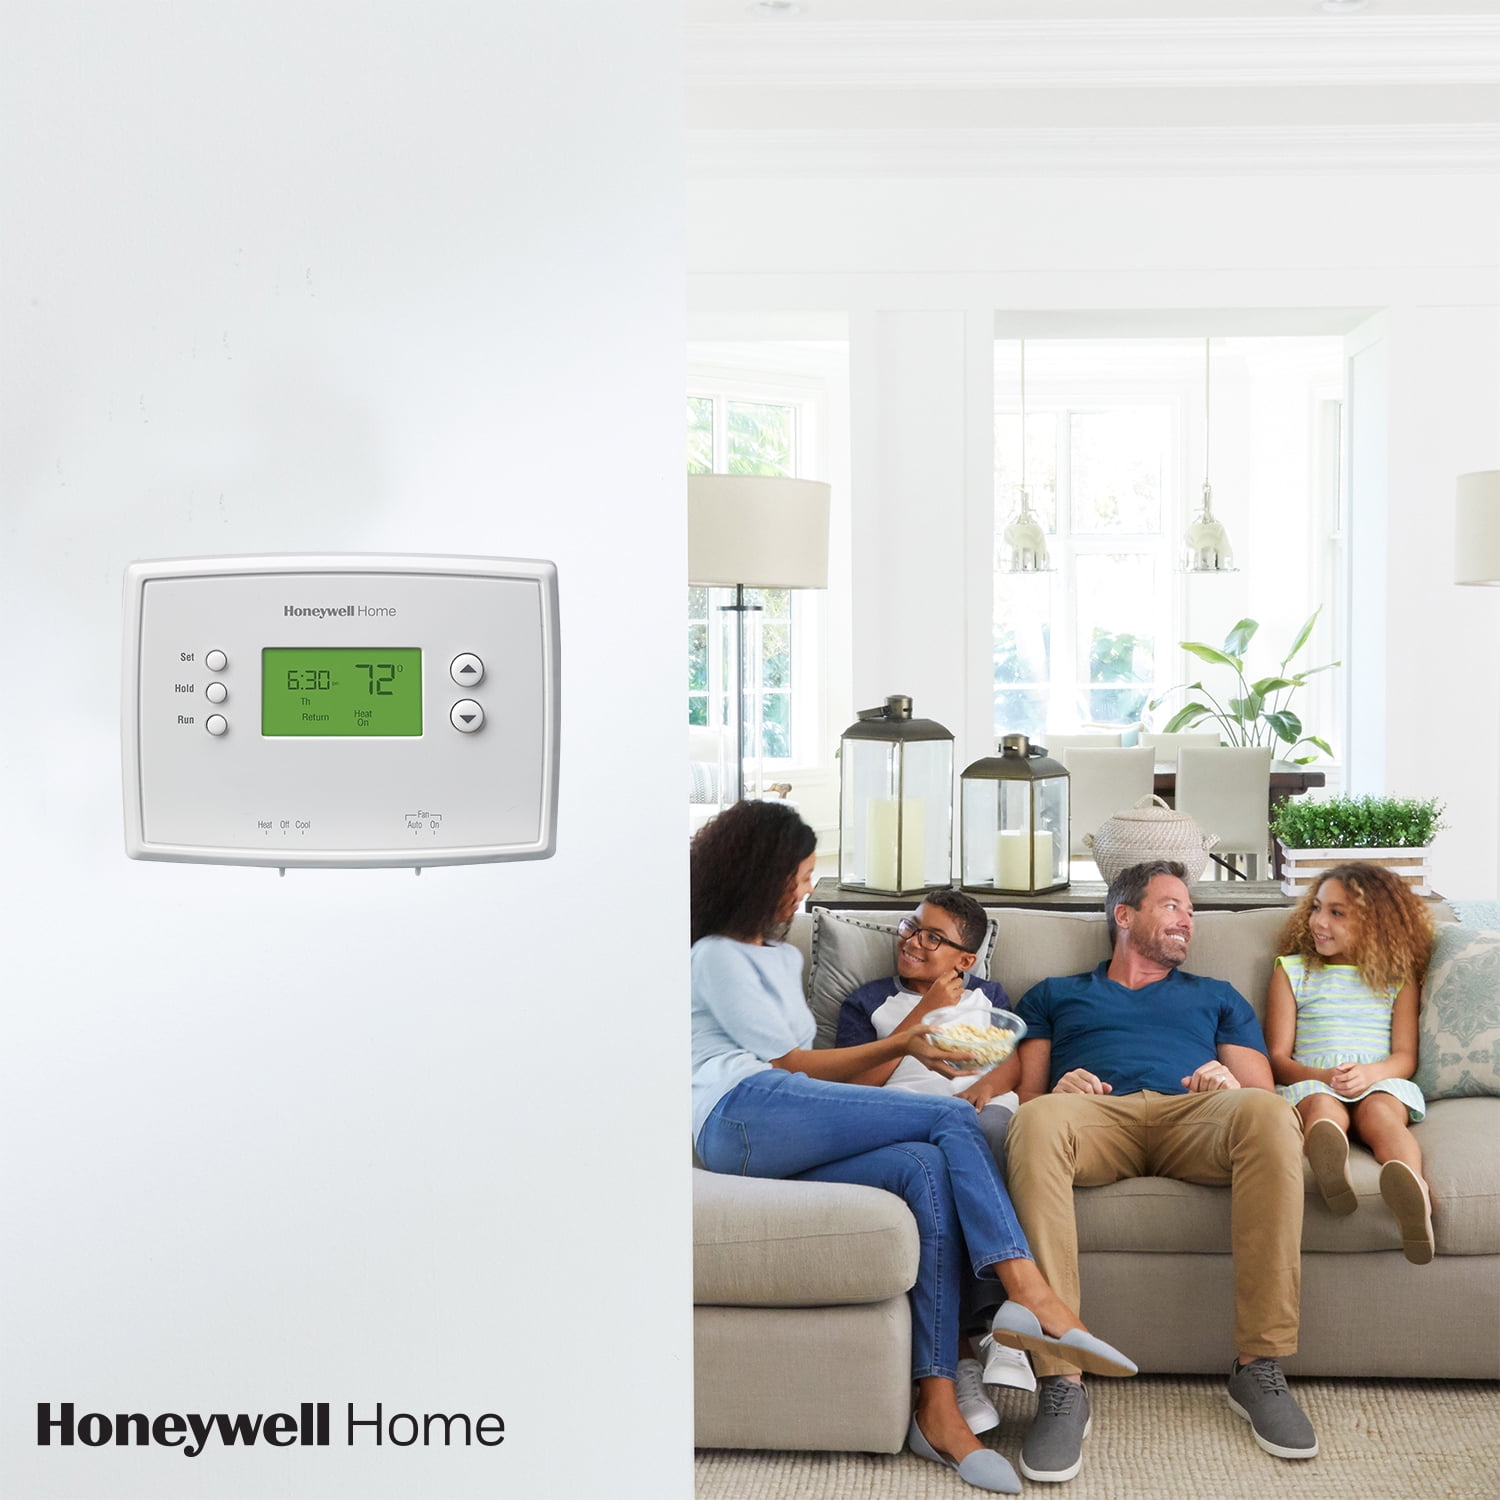 Honeywell Home T3 5-2 Day Programmable Thermostat with 2H/2C